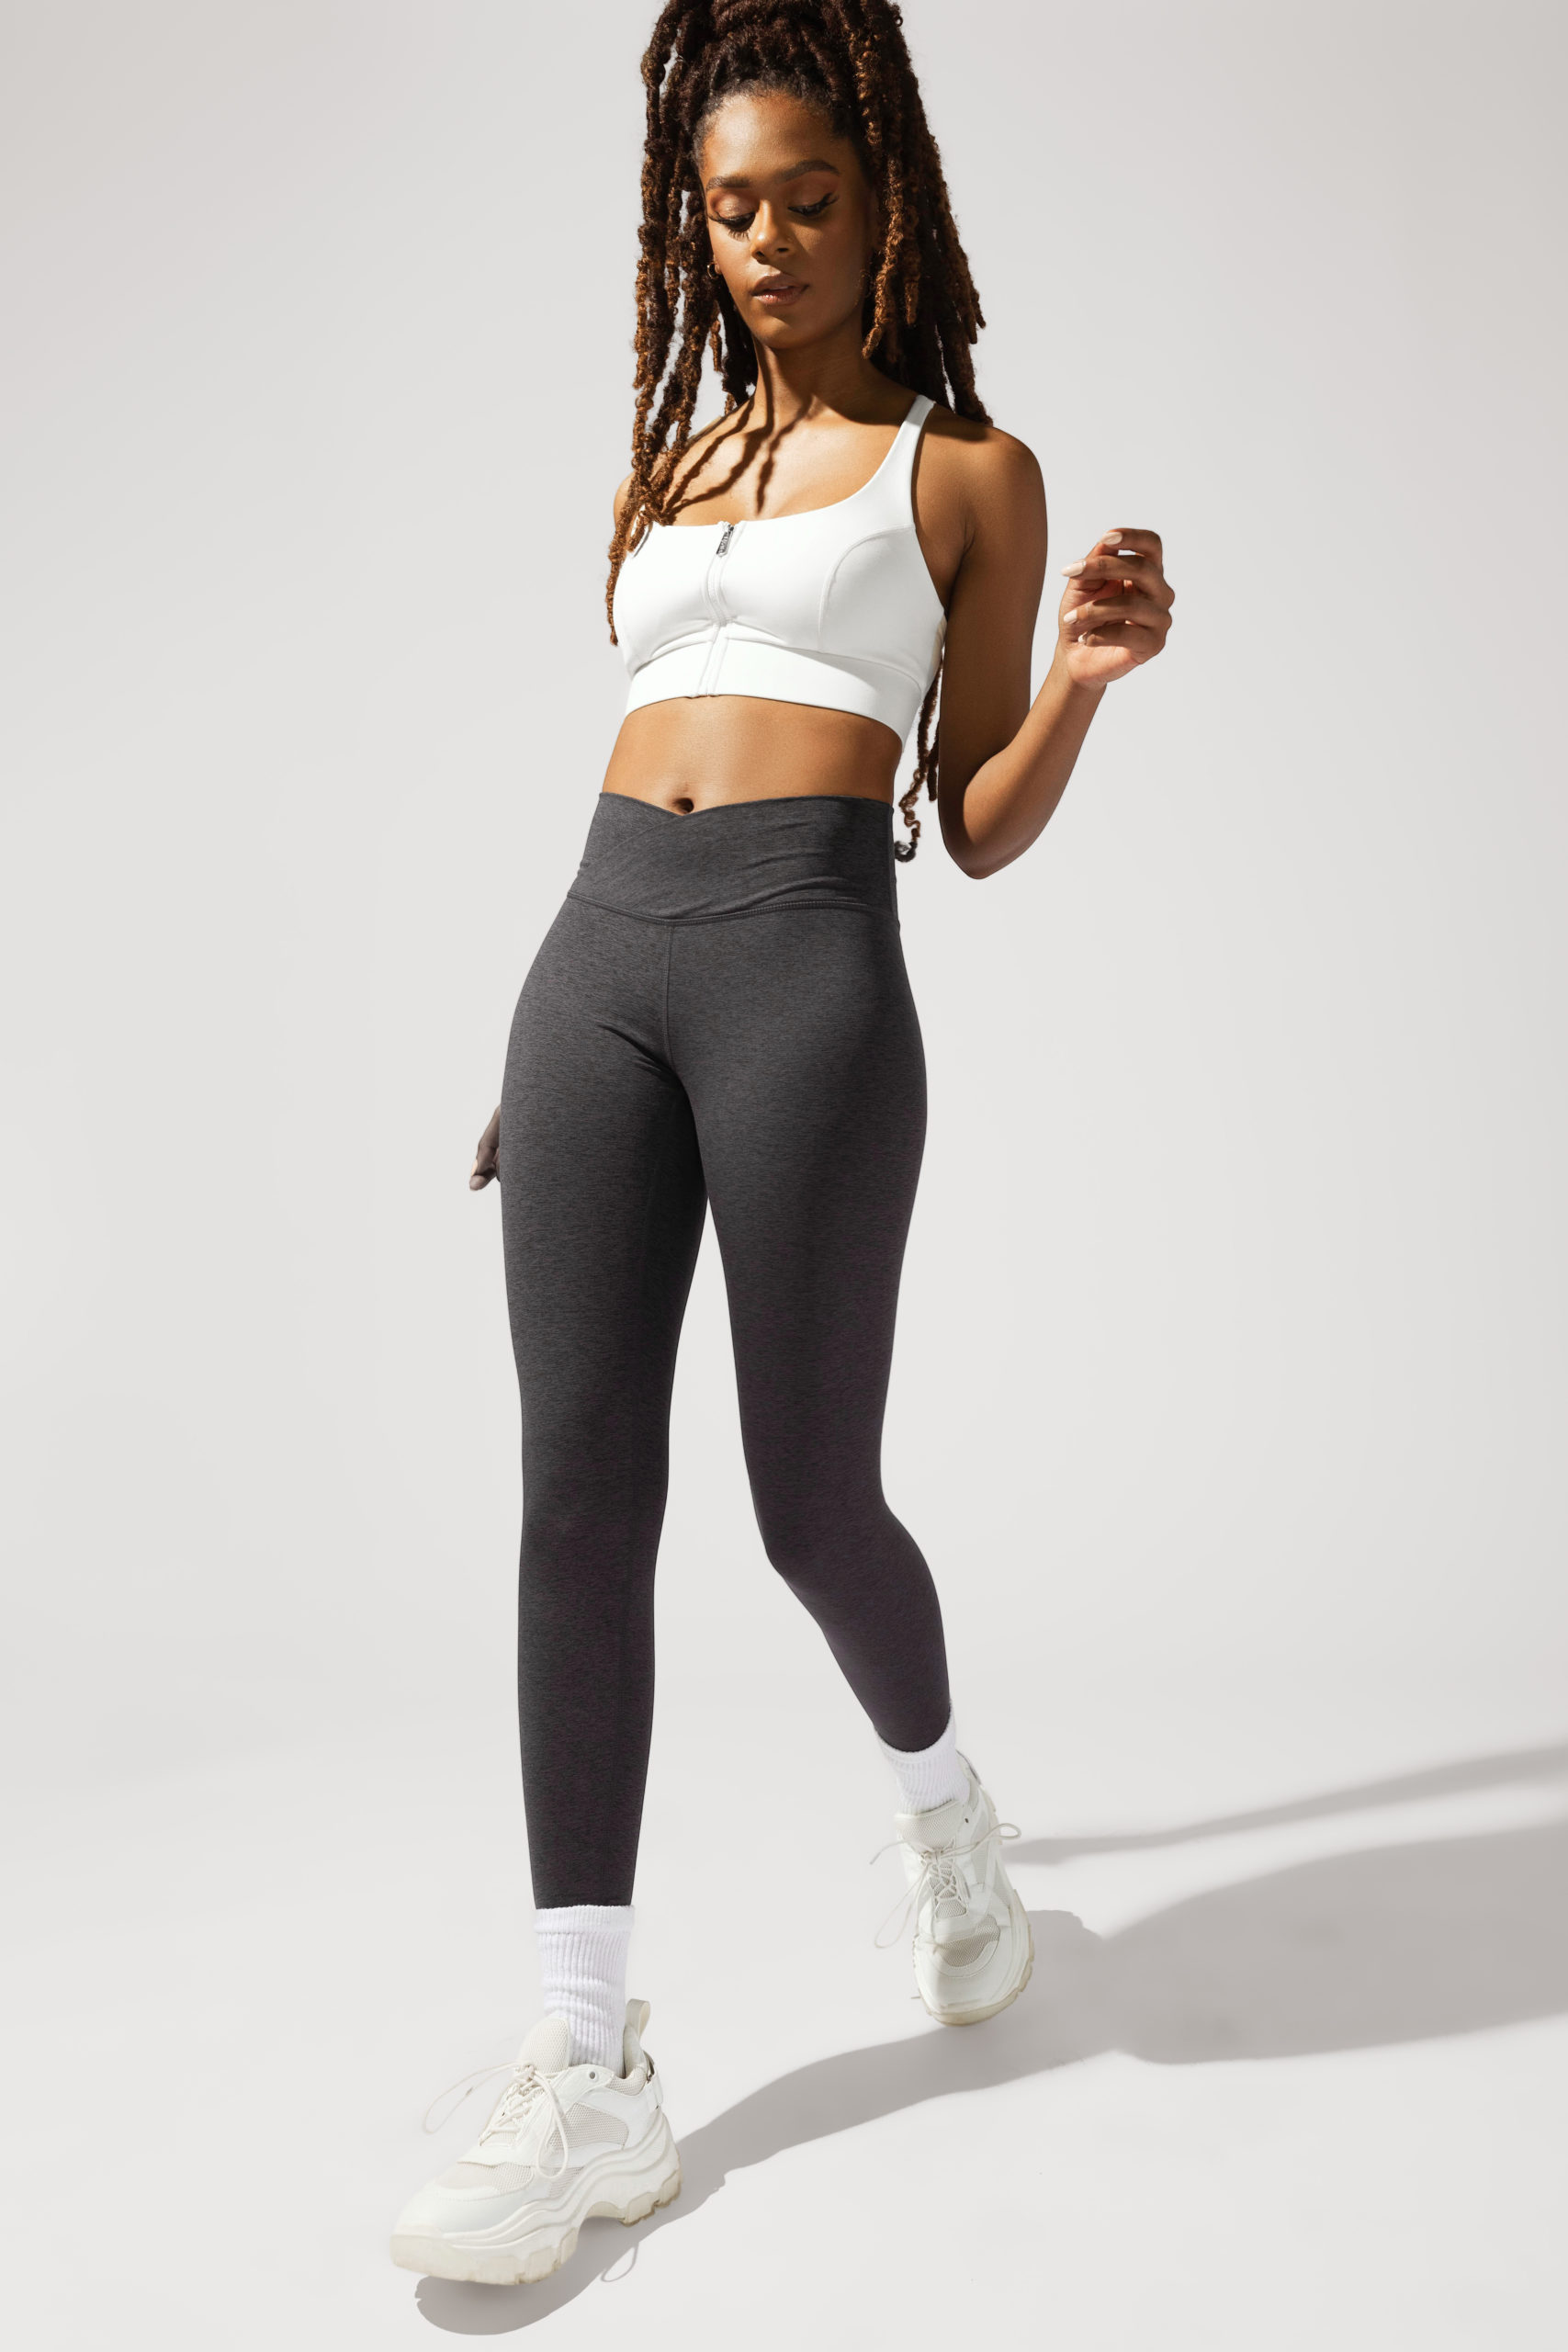 Meet Heathers, your capsule collection of luxe workout wear